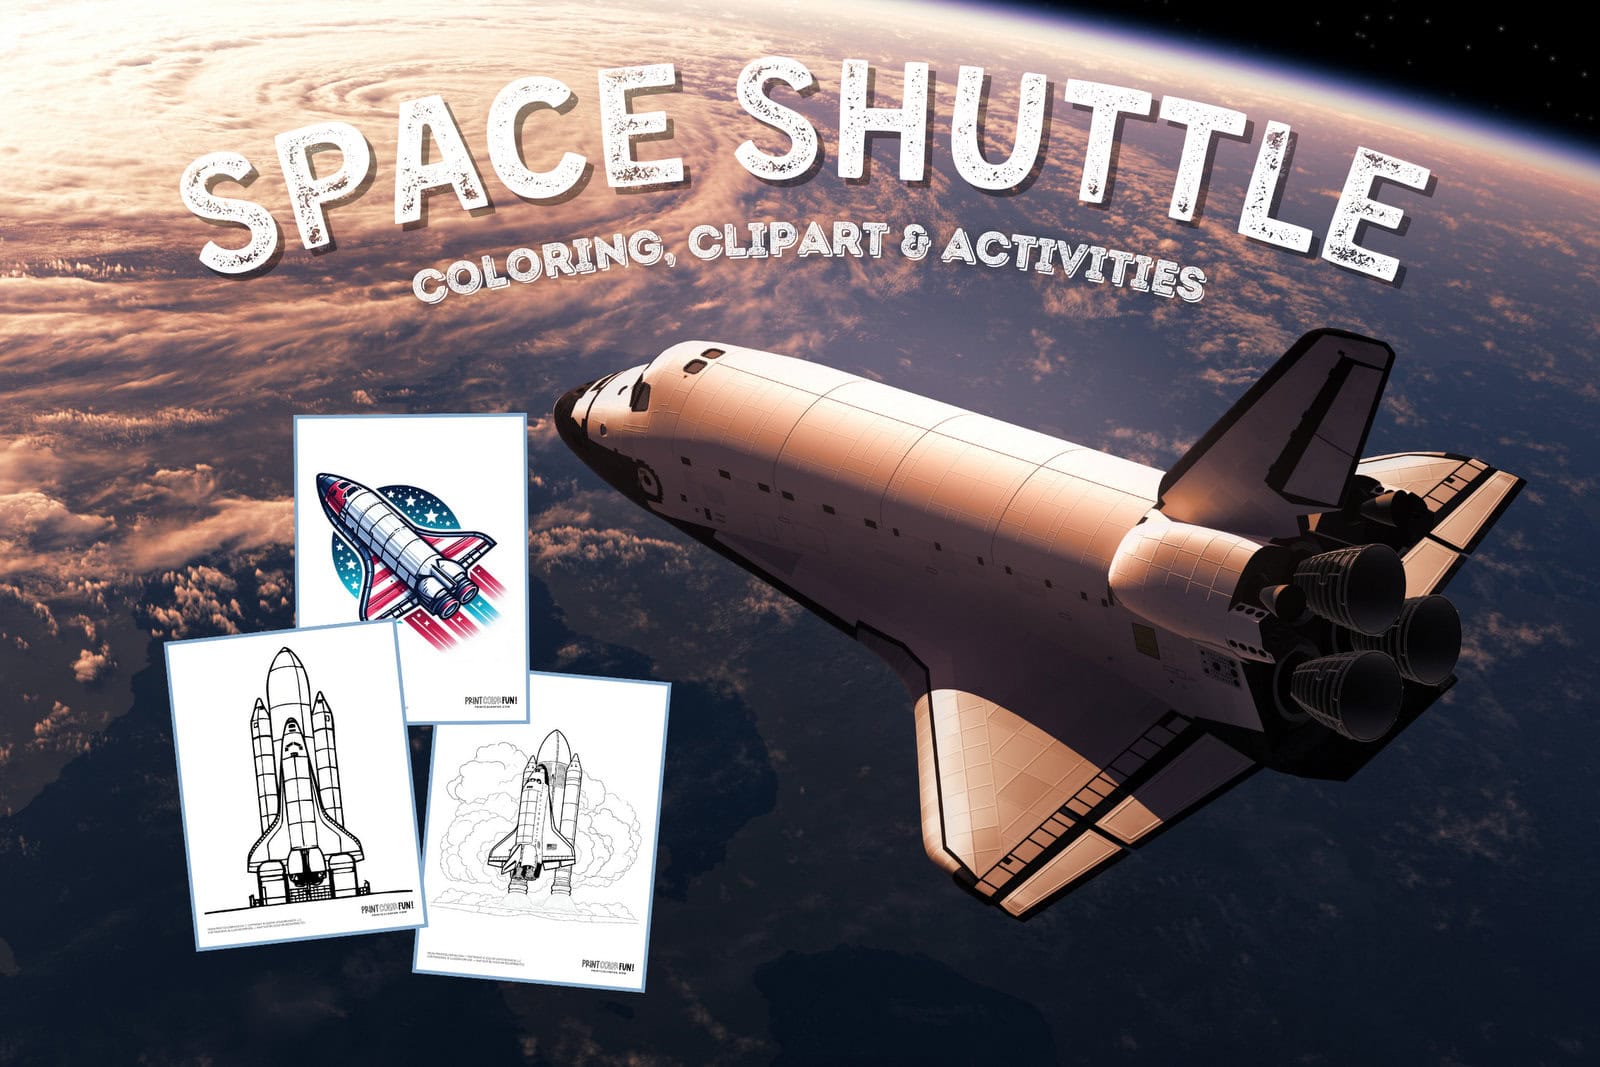 Space shuttle drawings, clipart, coloring pages at PrintColorFun com